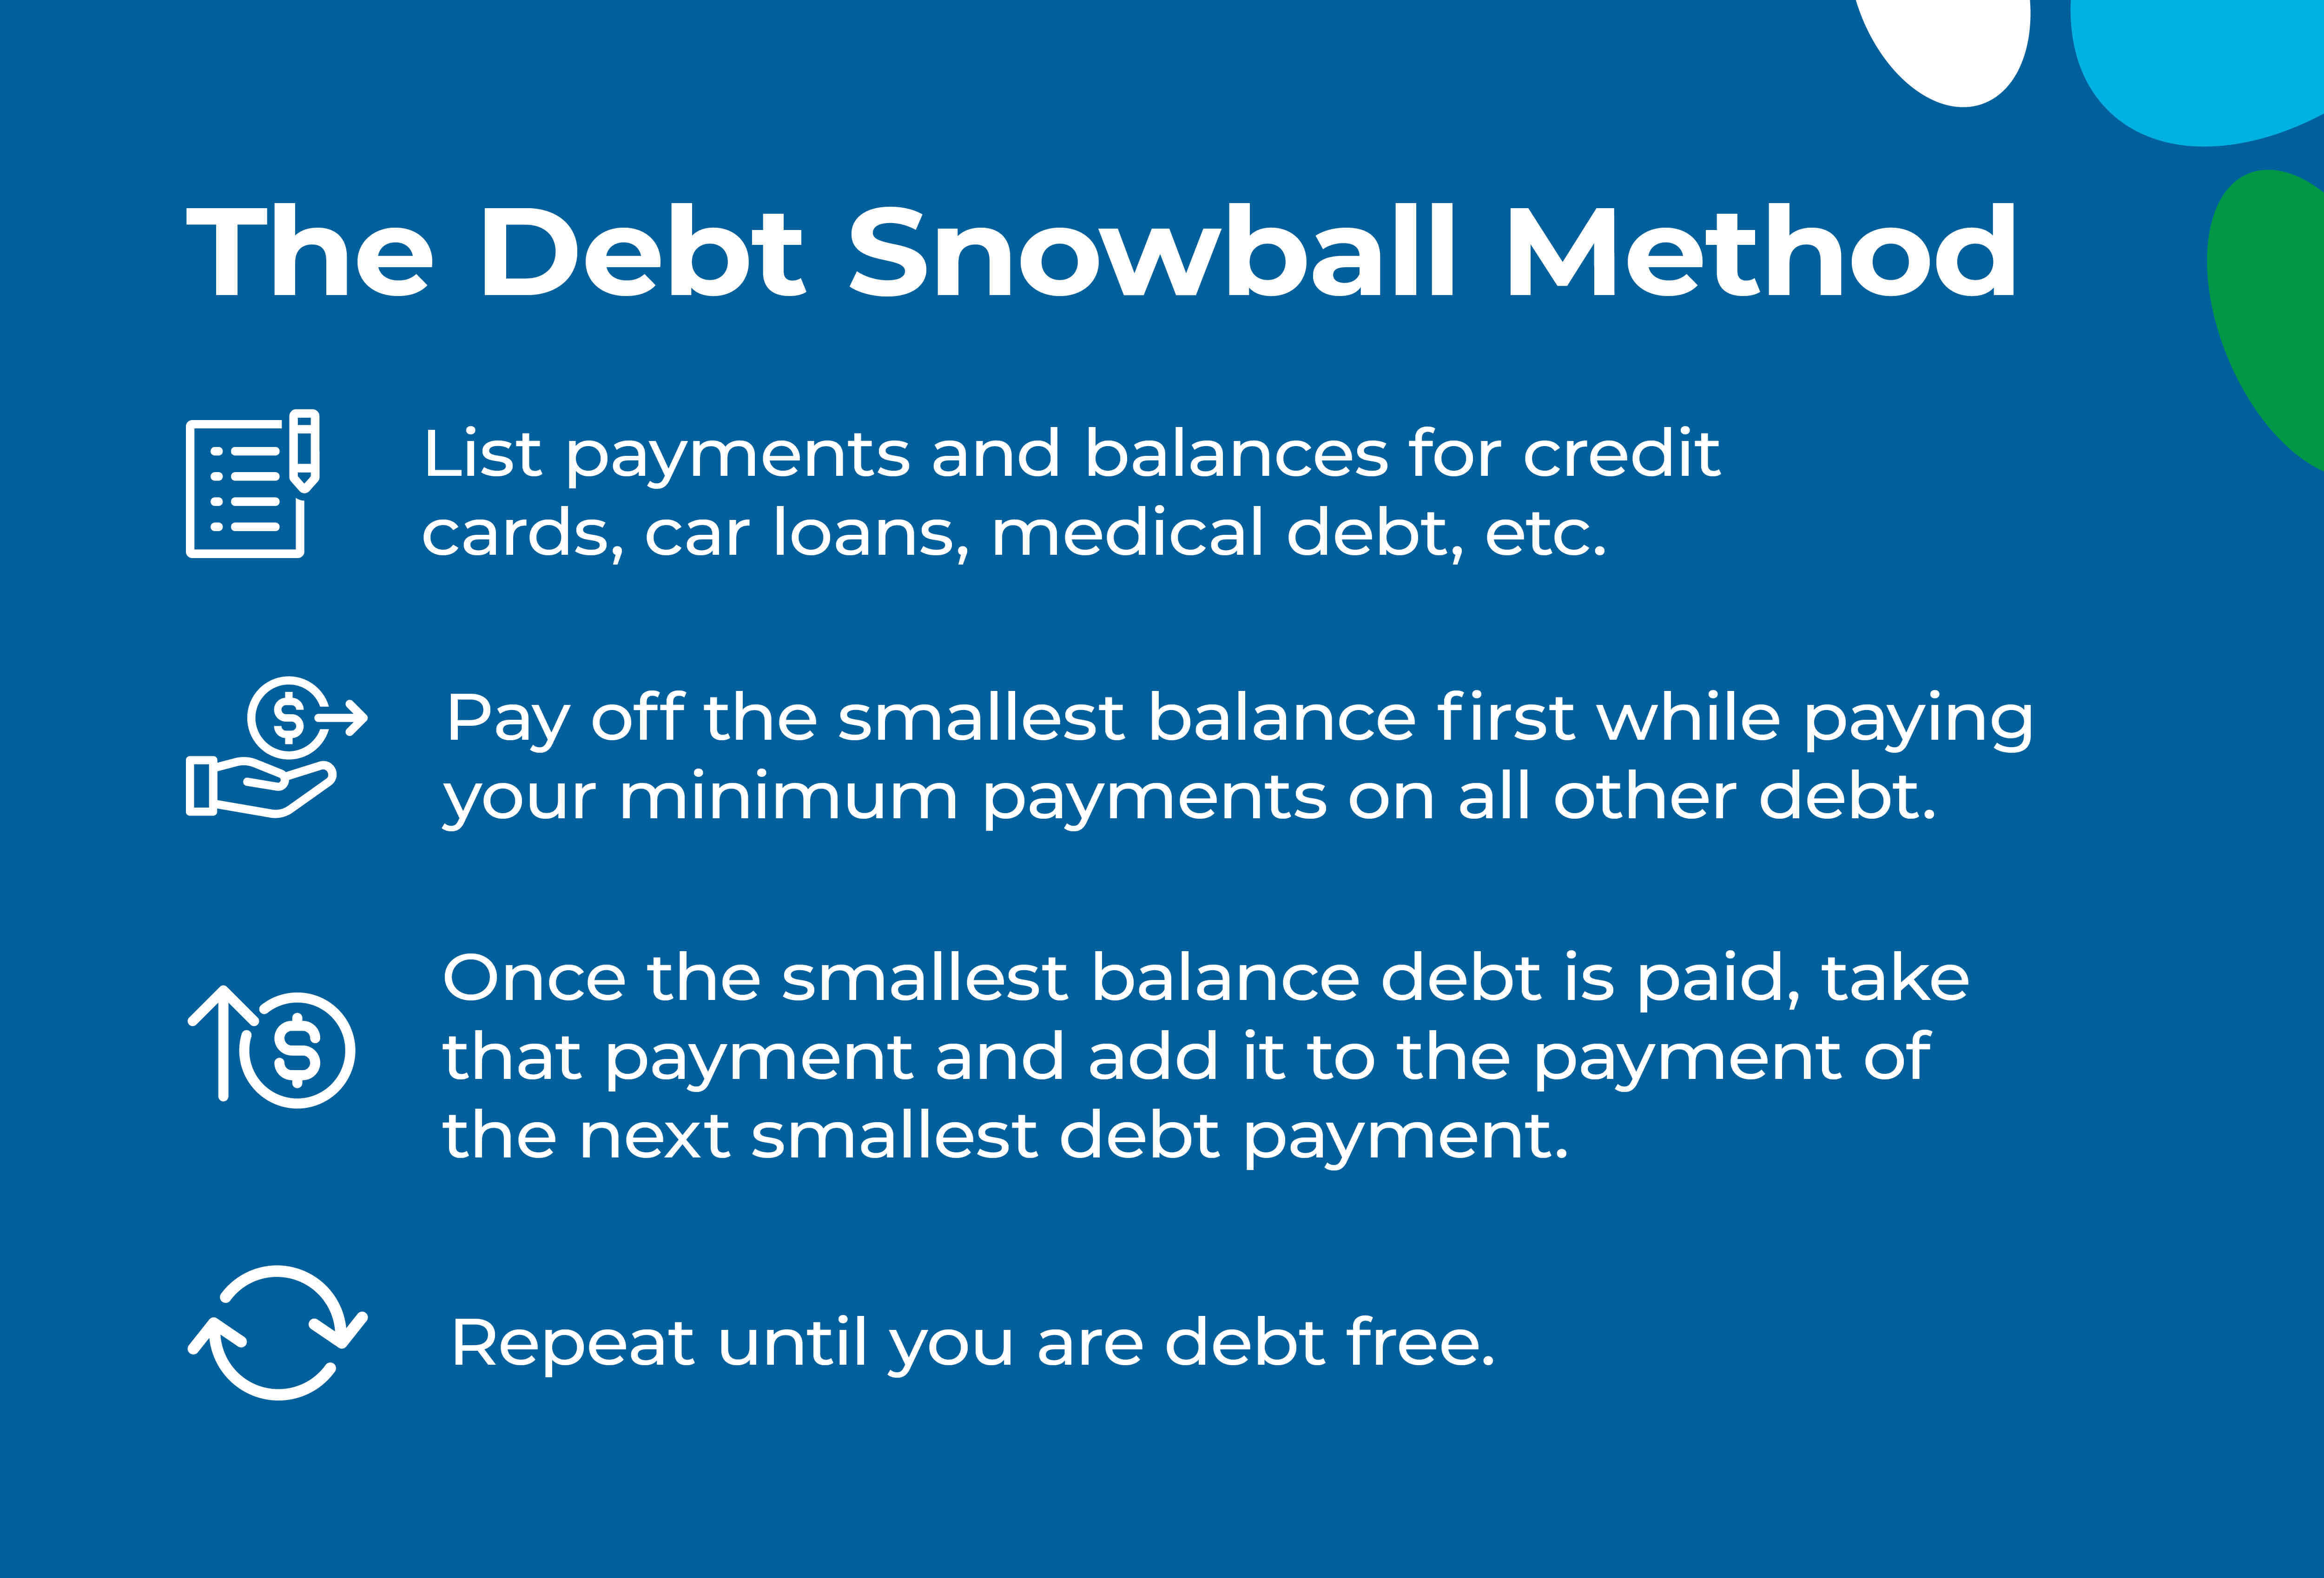 Explanation of the debt snowball method.